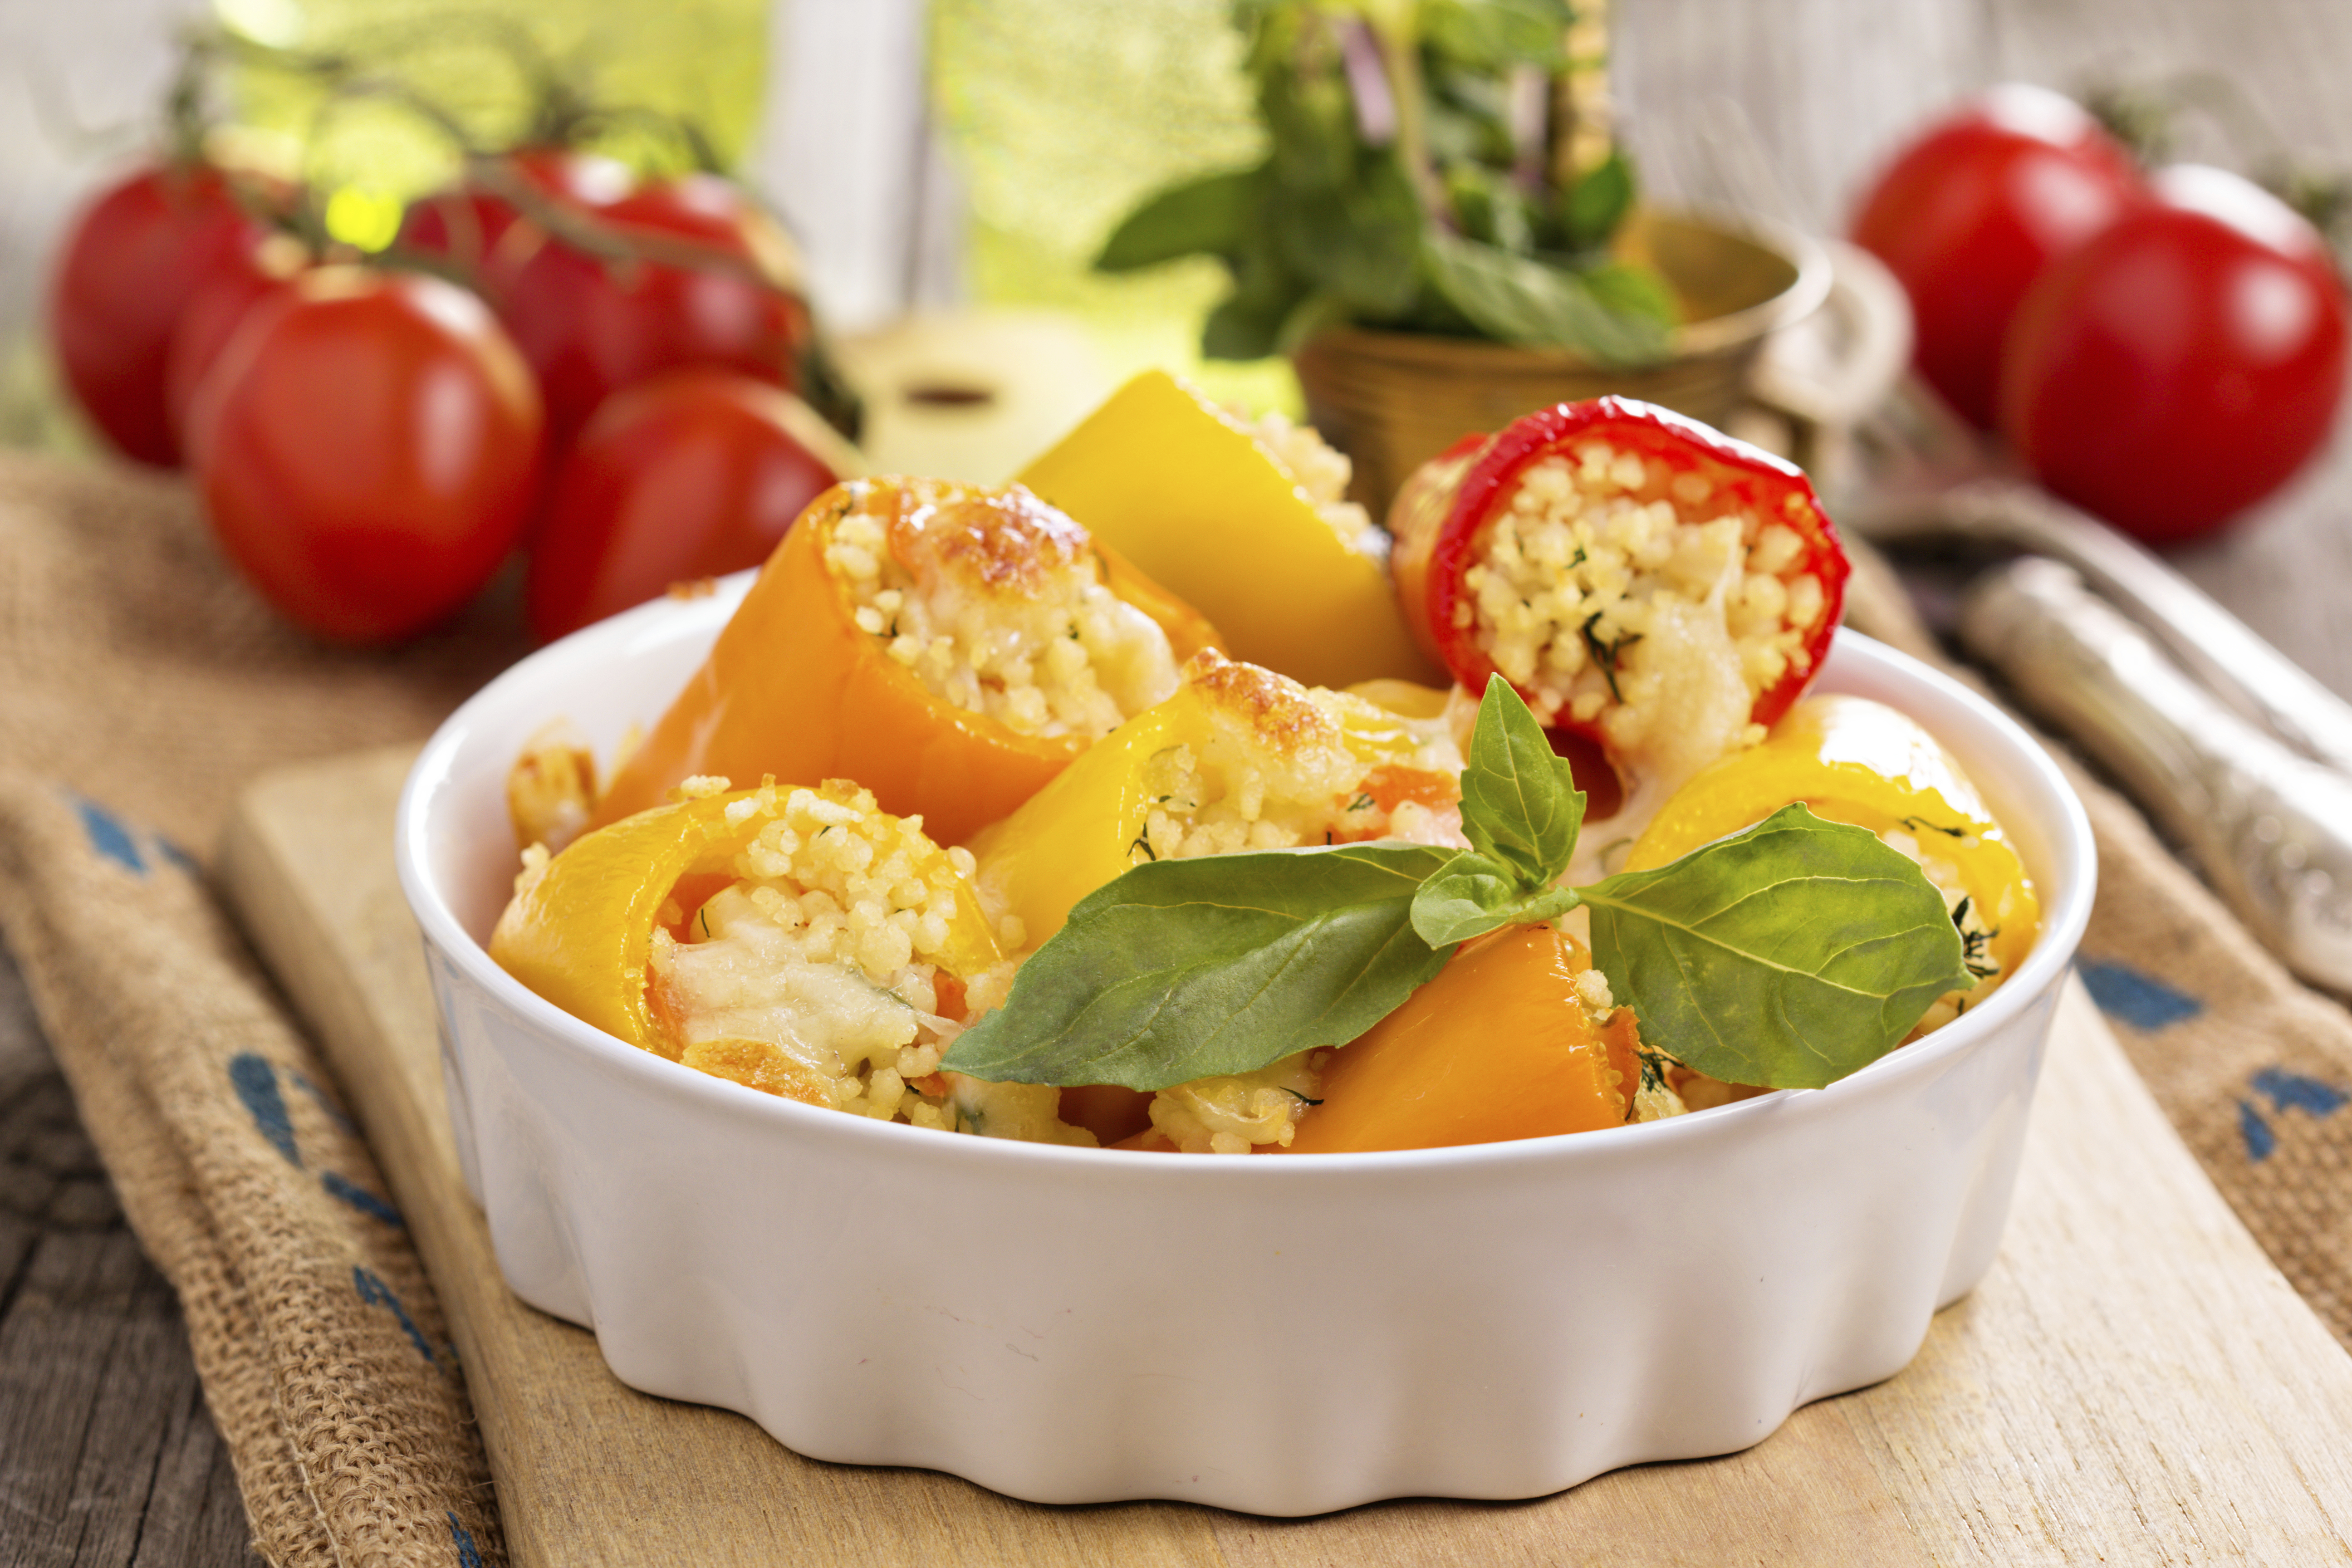 Stuffed peppers are a great compact dish to make for dinner. 